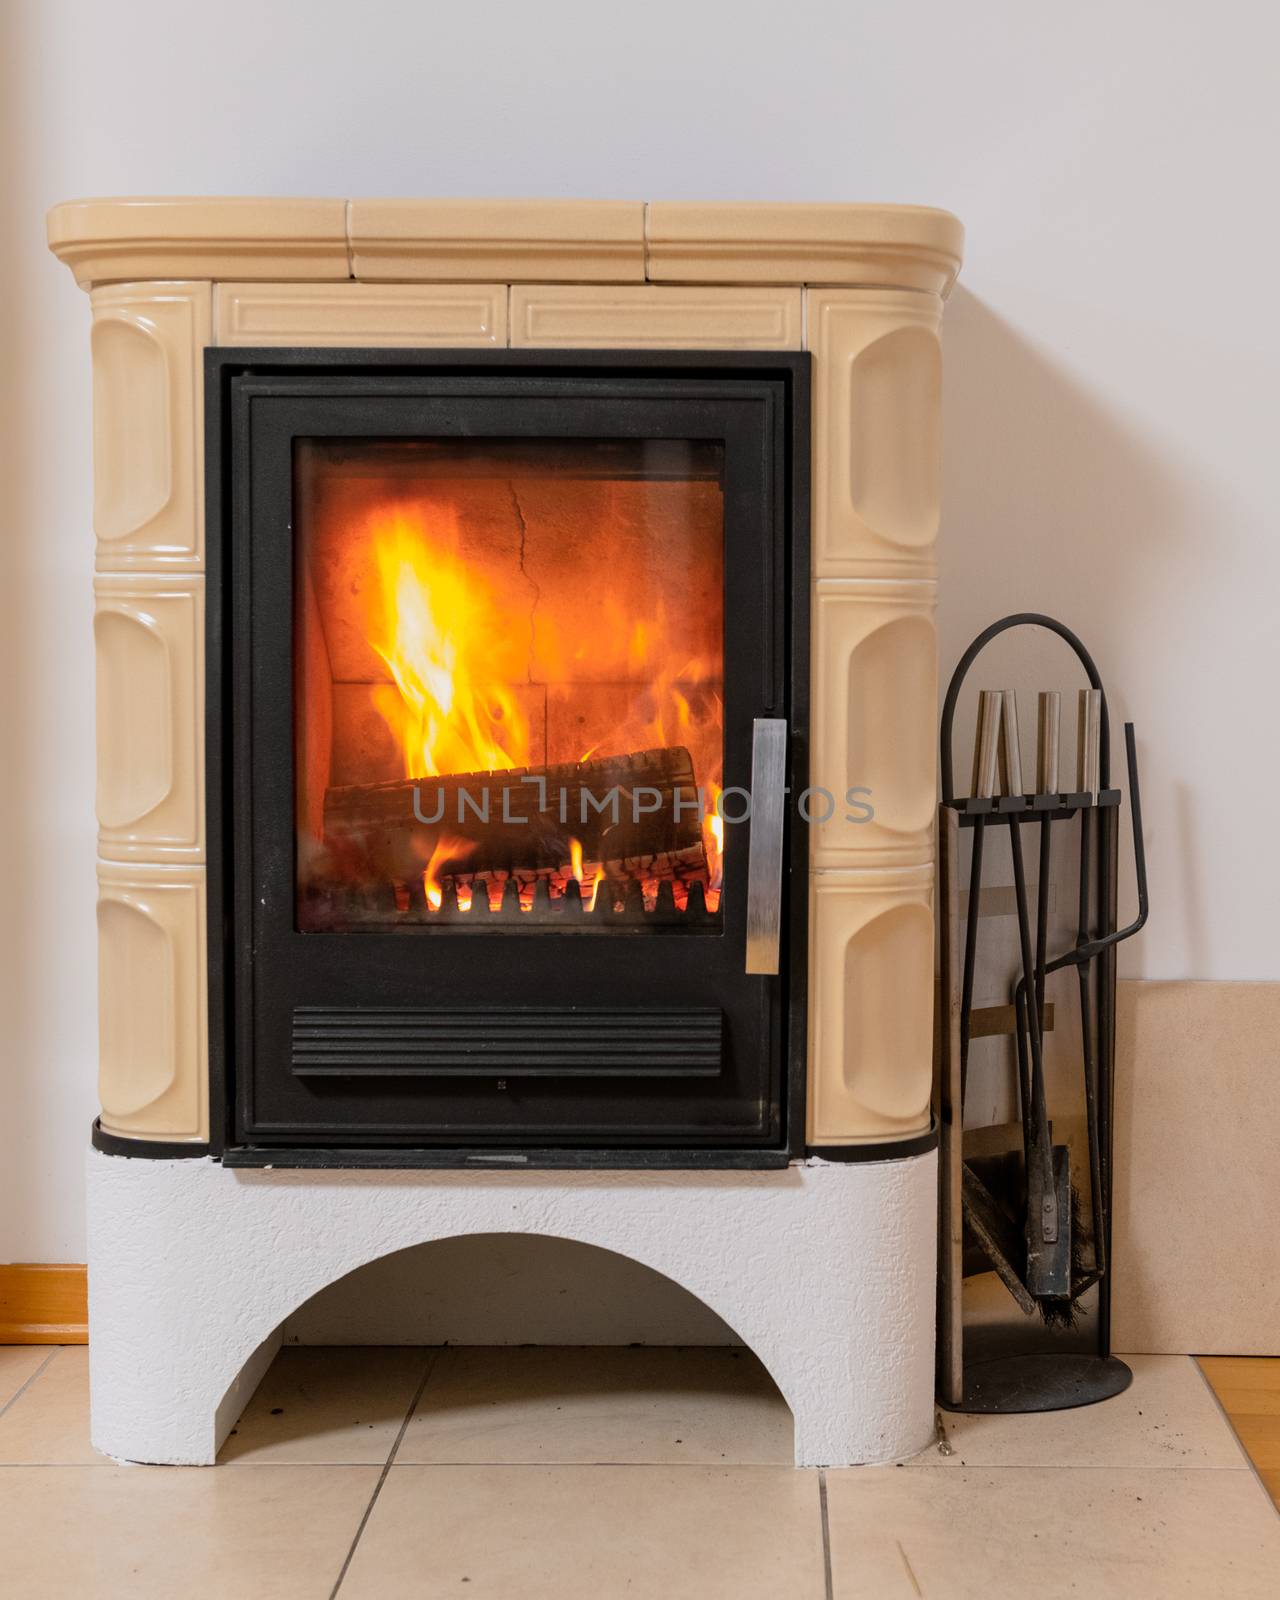 Tiled stove with fire burning inside, cosy and warm interior scene, heating in winter, Christmas decoration on the wall